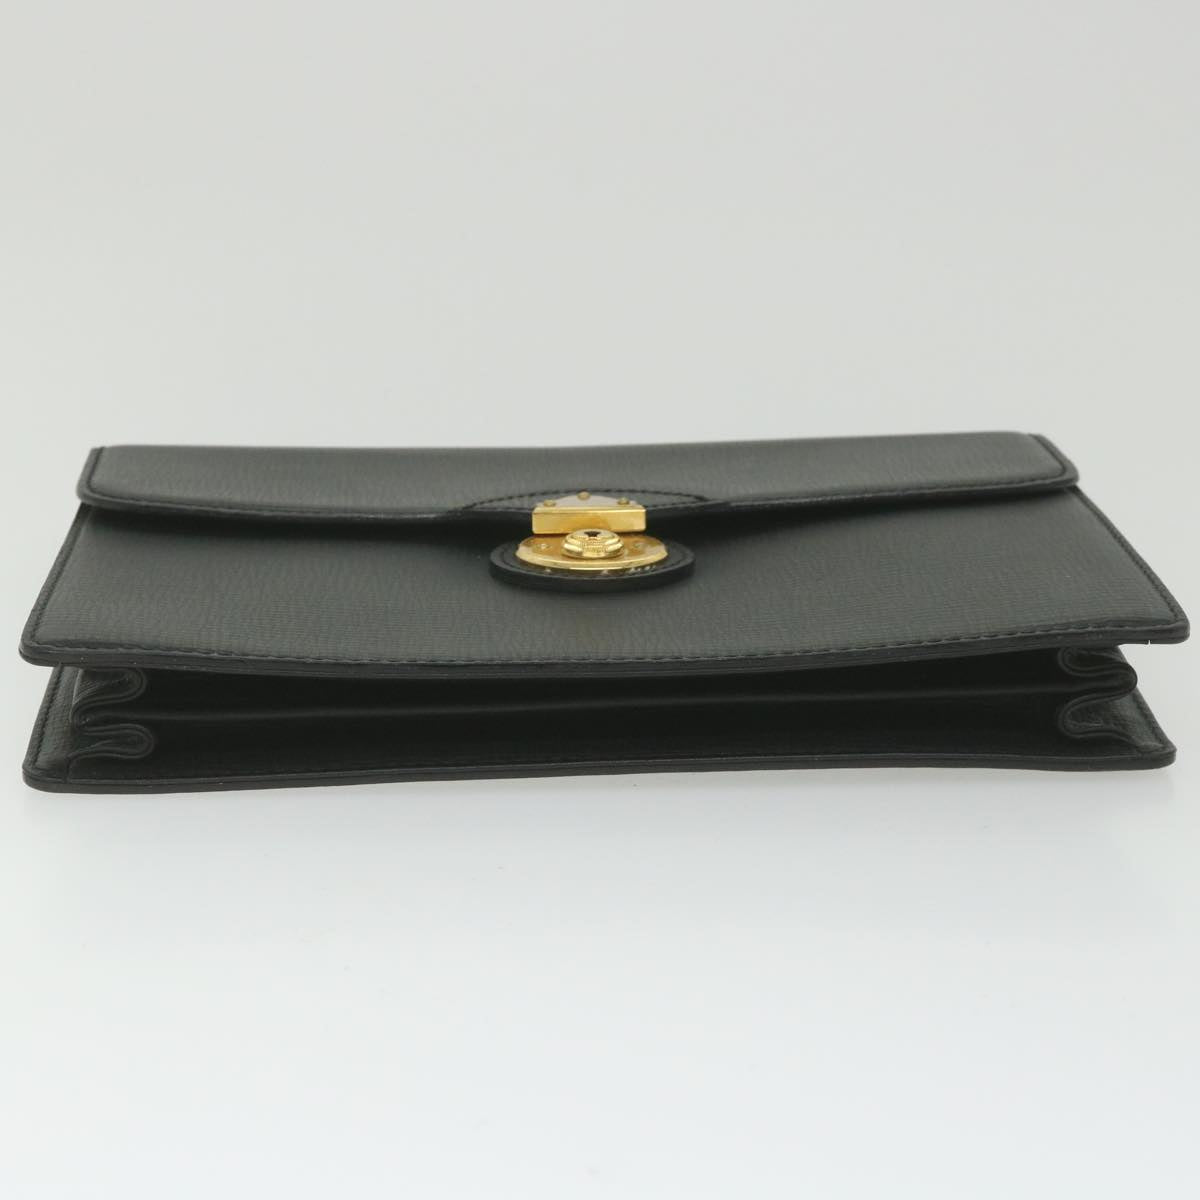 Burberrys Clutch Bag Leather Black Auth bs10055